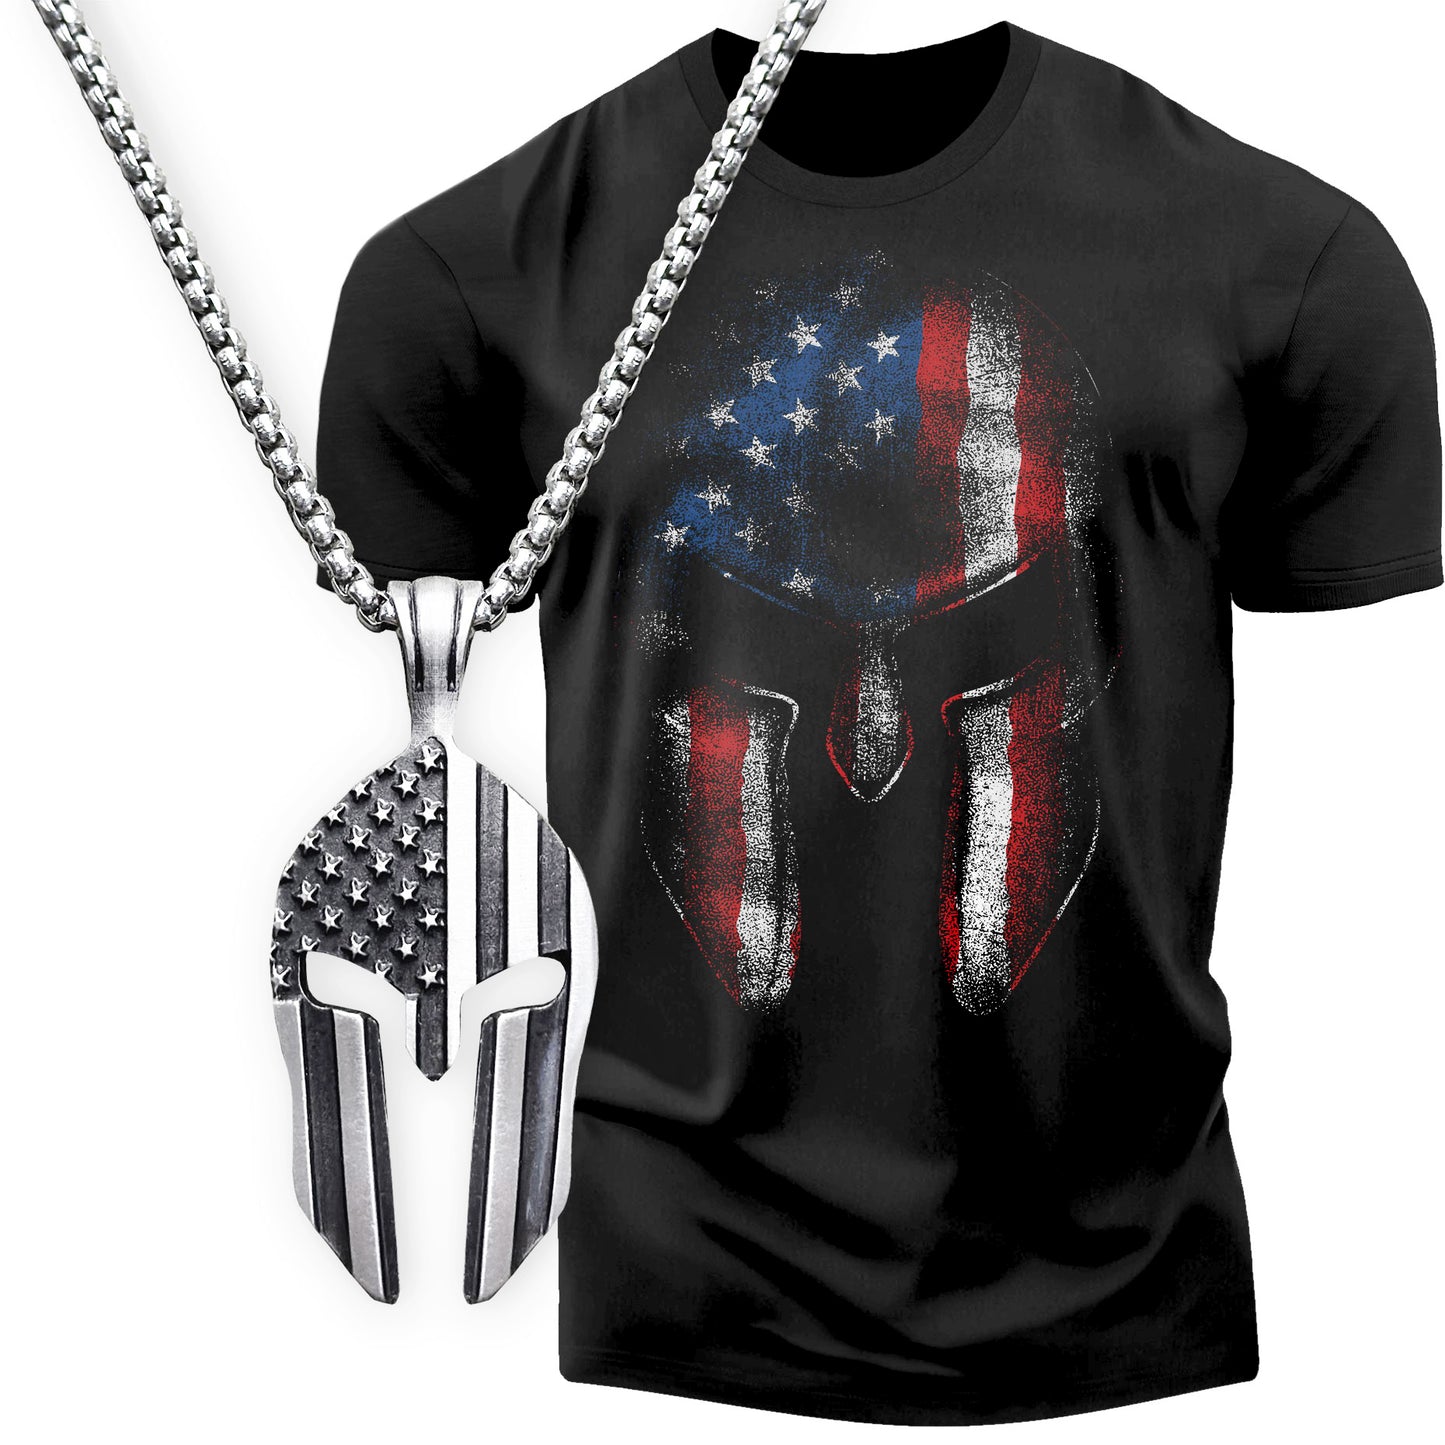 Gift Set for Men American Spartan Workout Gym Shirt with Spartan Warrior Pendant